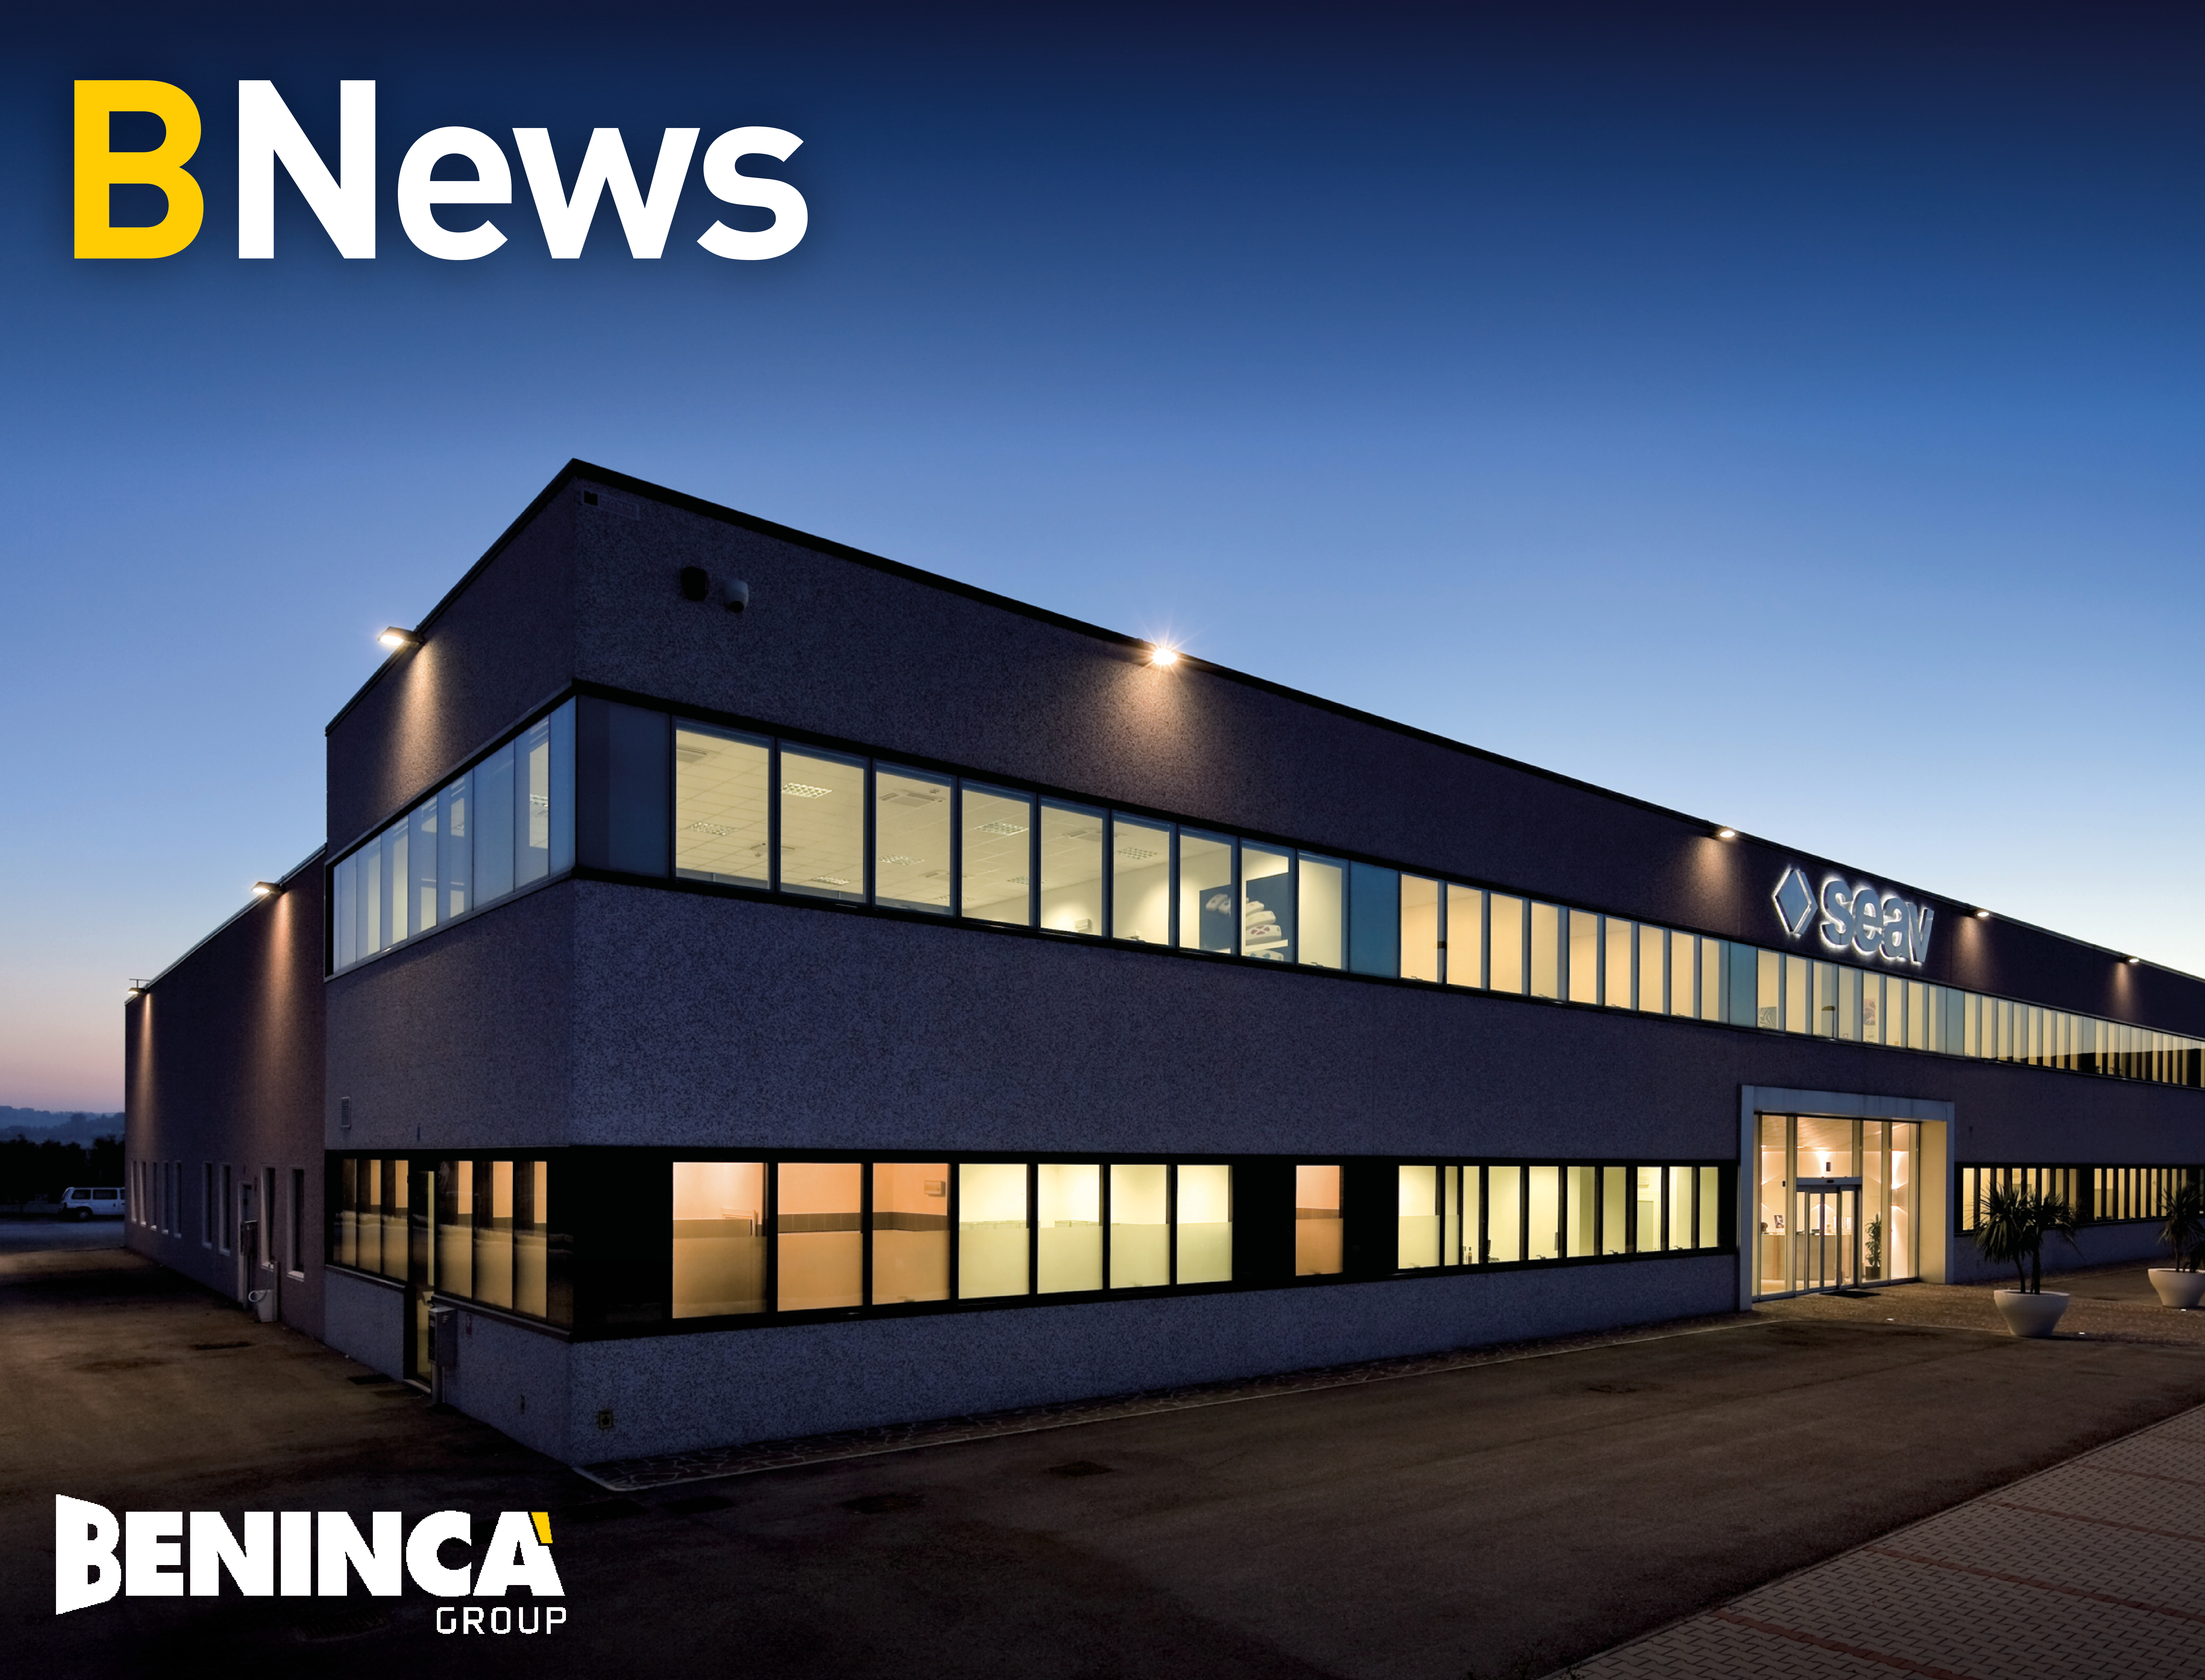 New acquisitions for the Benincà Group